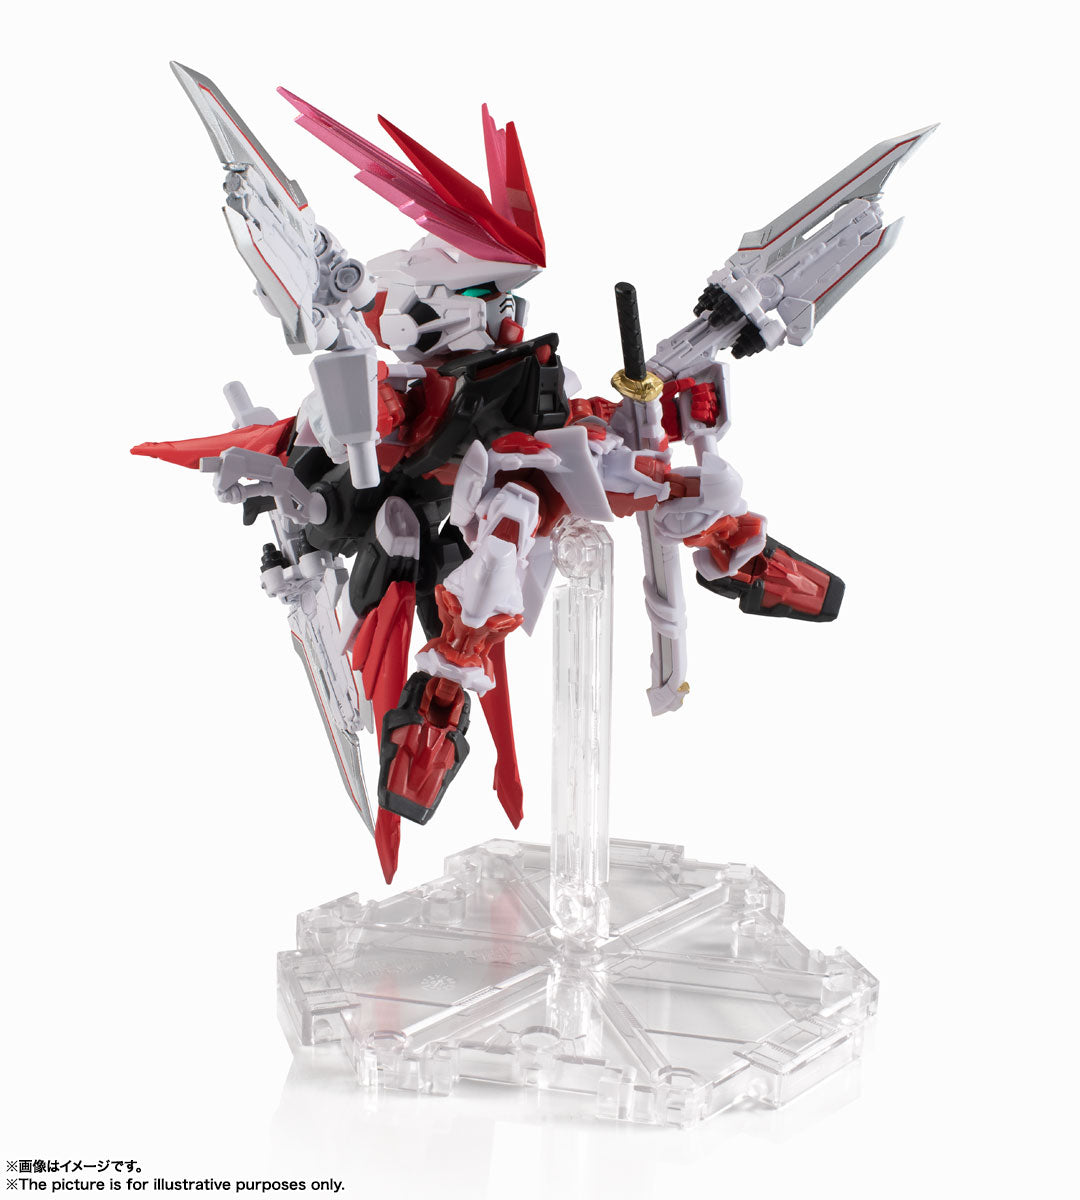 Limited Bandai Spirits NXEDGE Style MS Unit Gundam Astray Red Dragon "Mobile Suit Gundam Seed Destiny Astray R"